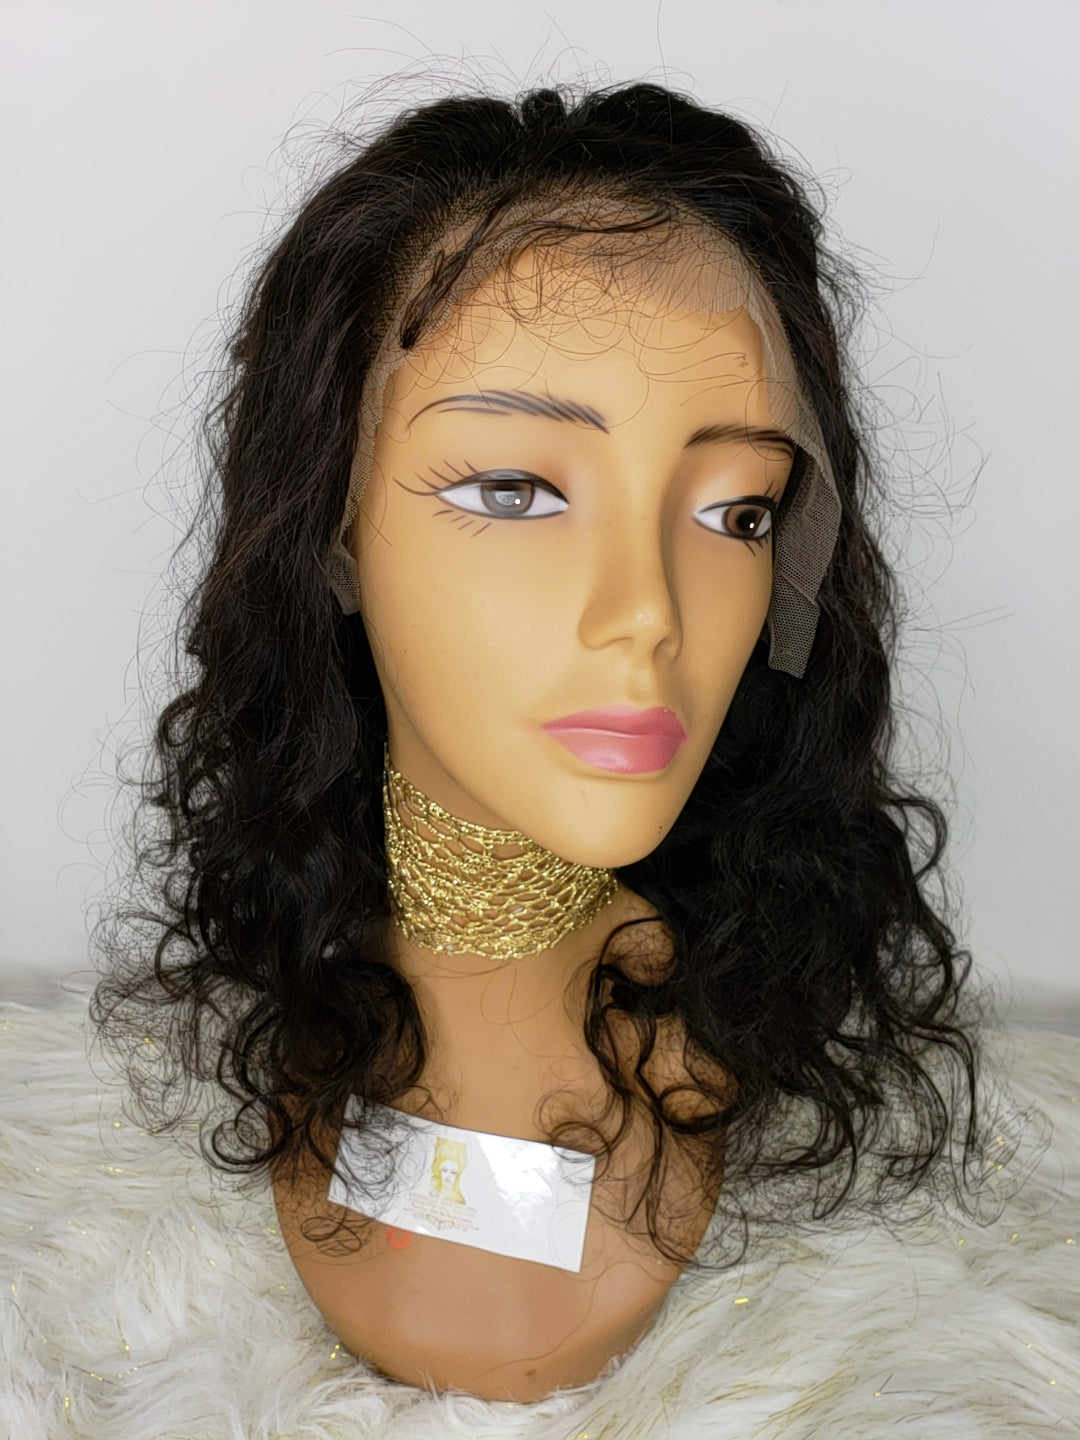 Front Lace Wig (Loose Curl)